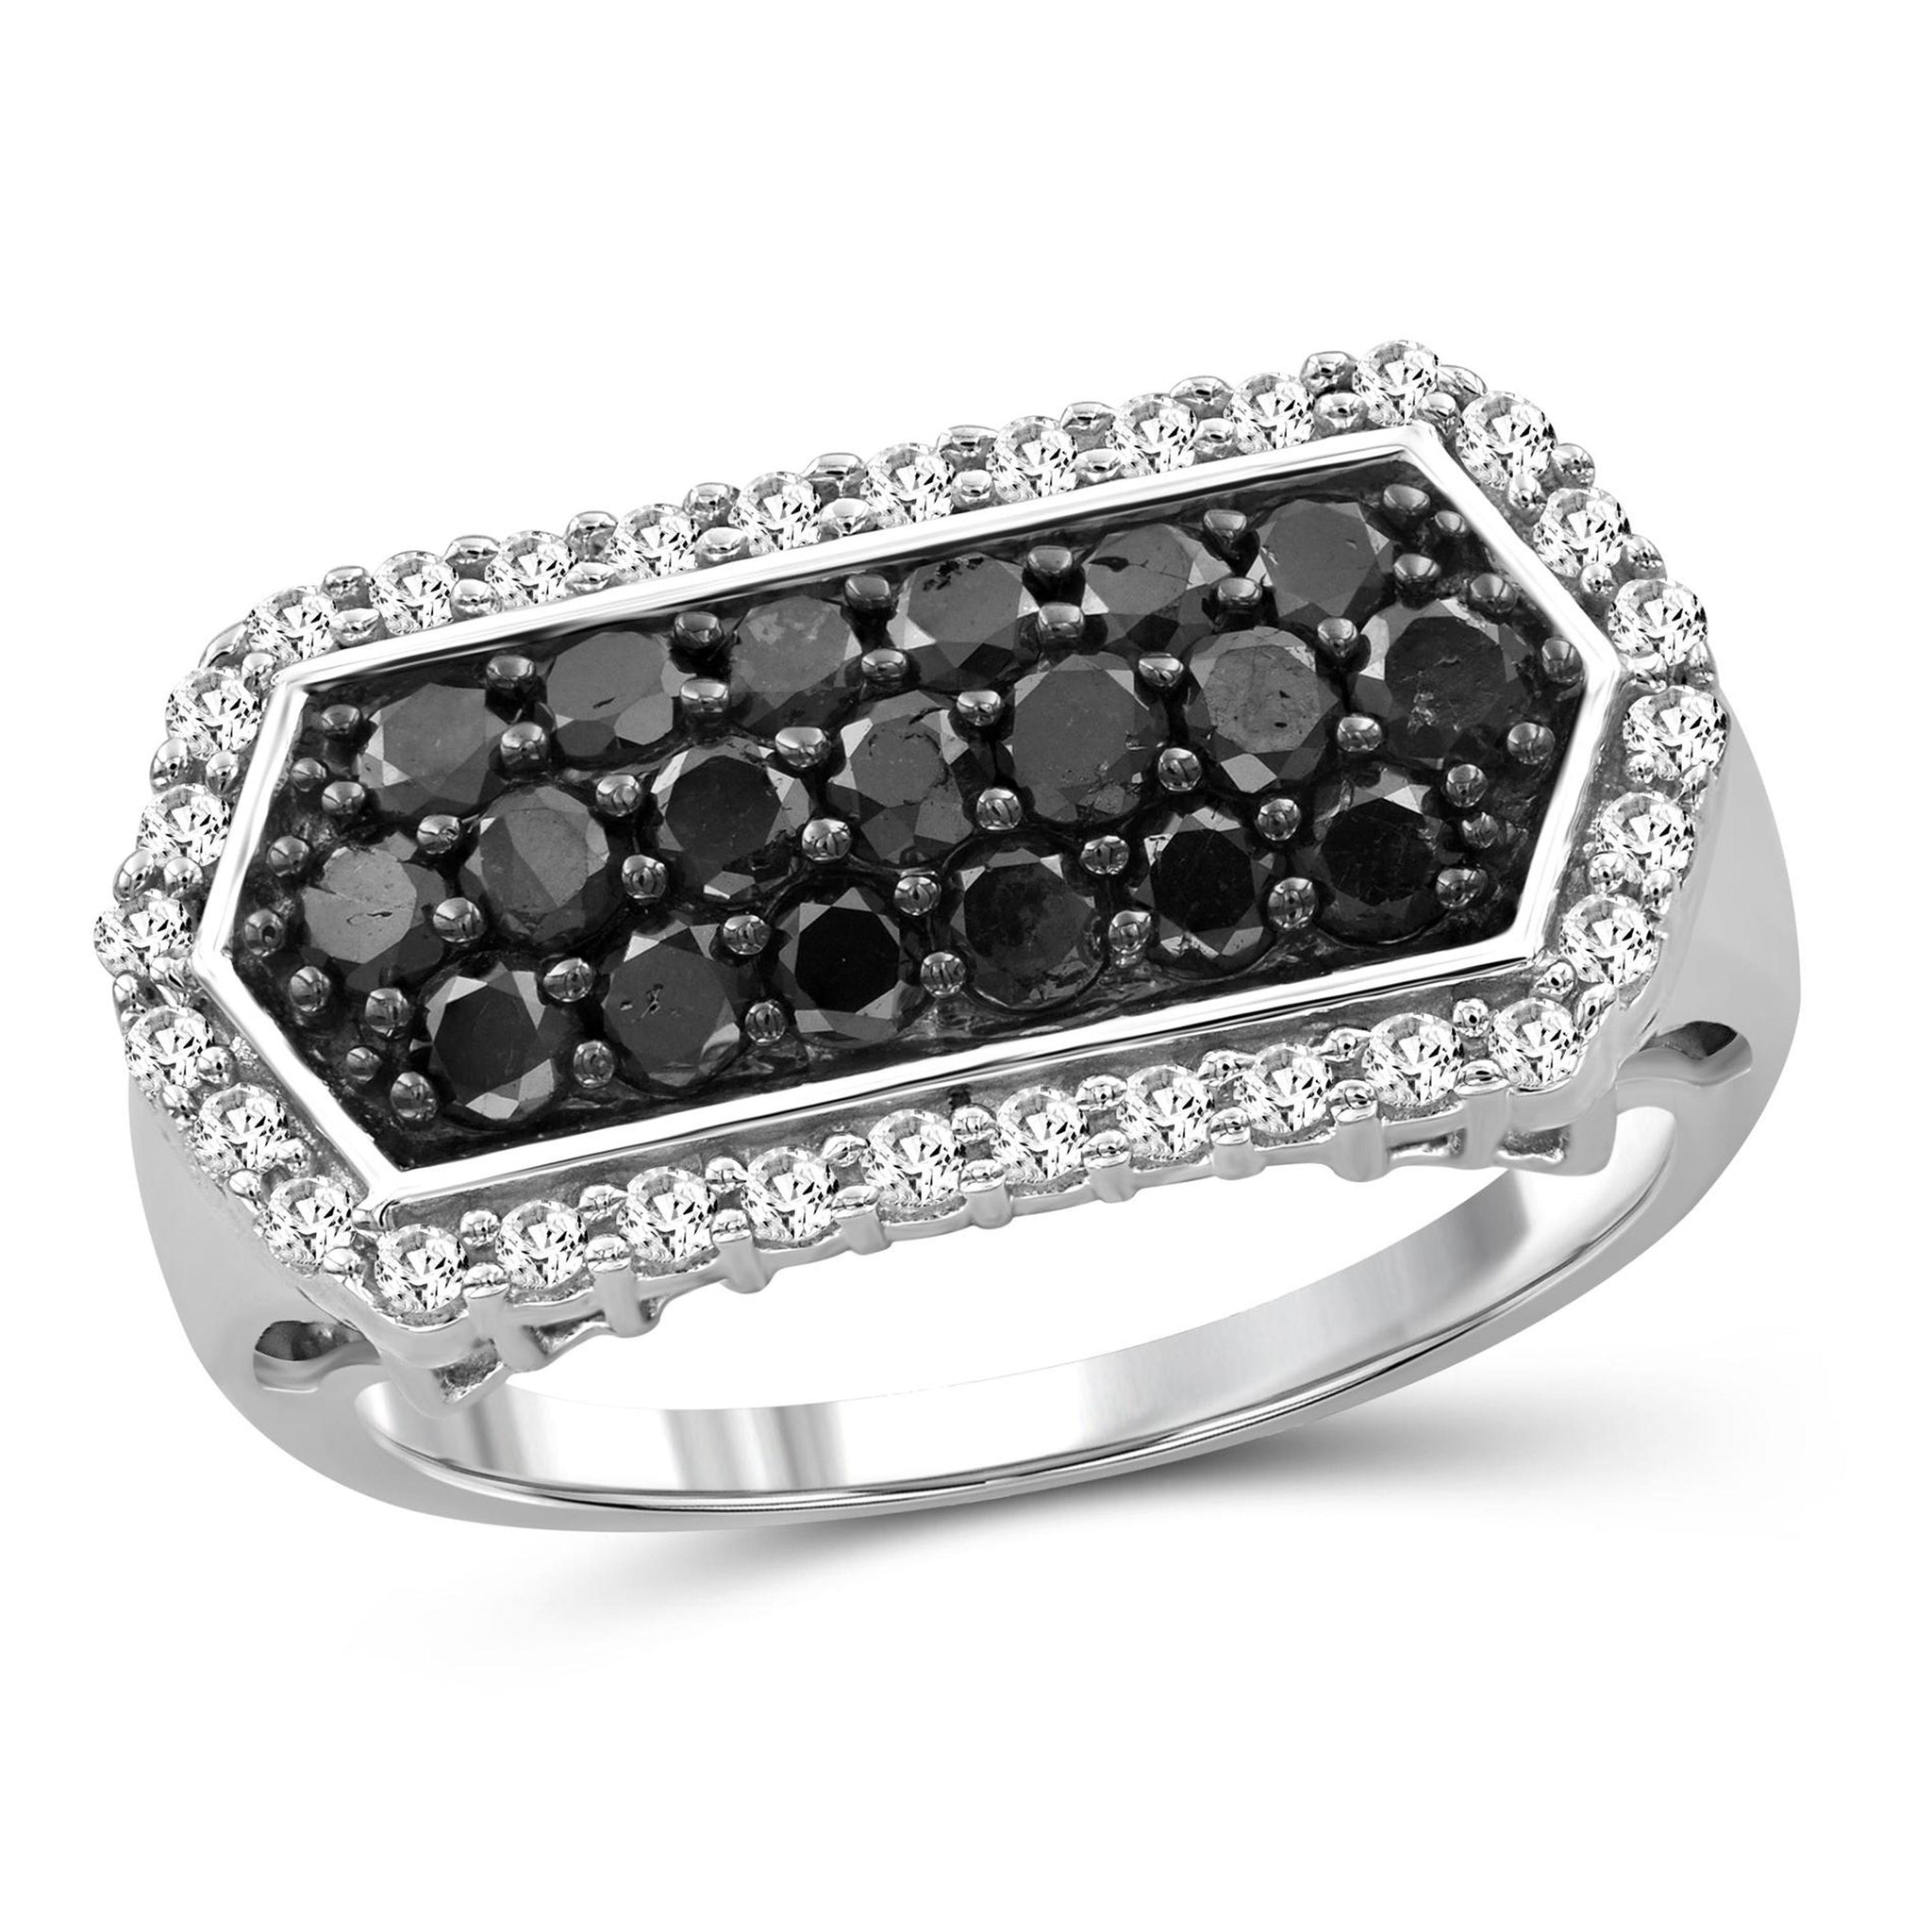 JewelonFire 1 Carat T.W. Black And White Diamond Sterling Silver Band